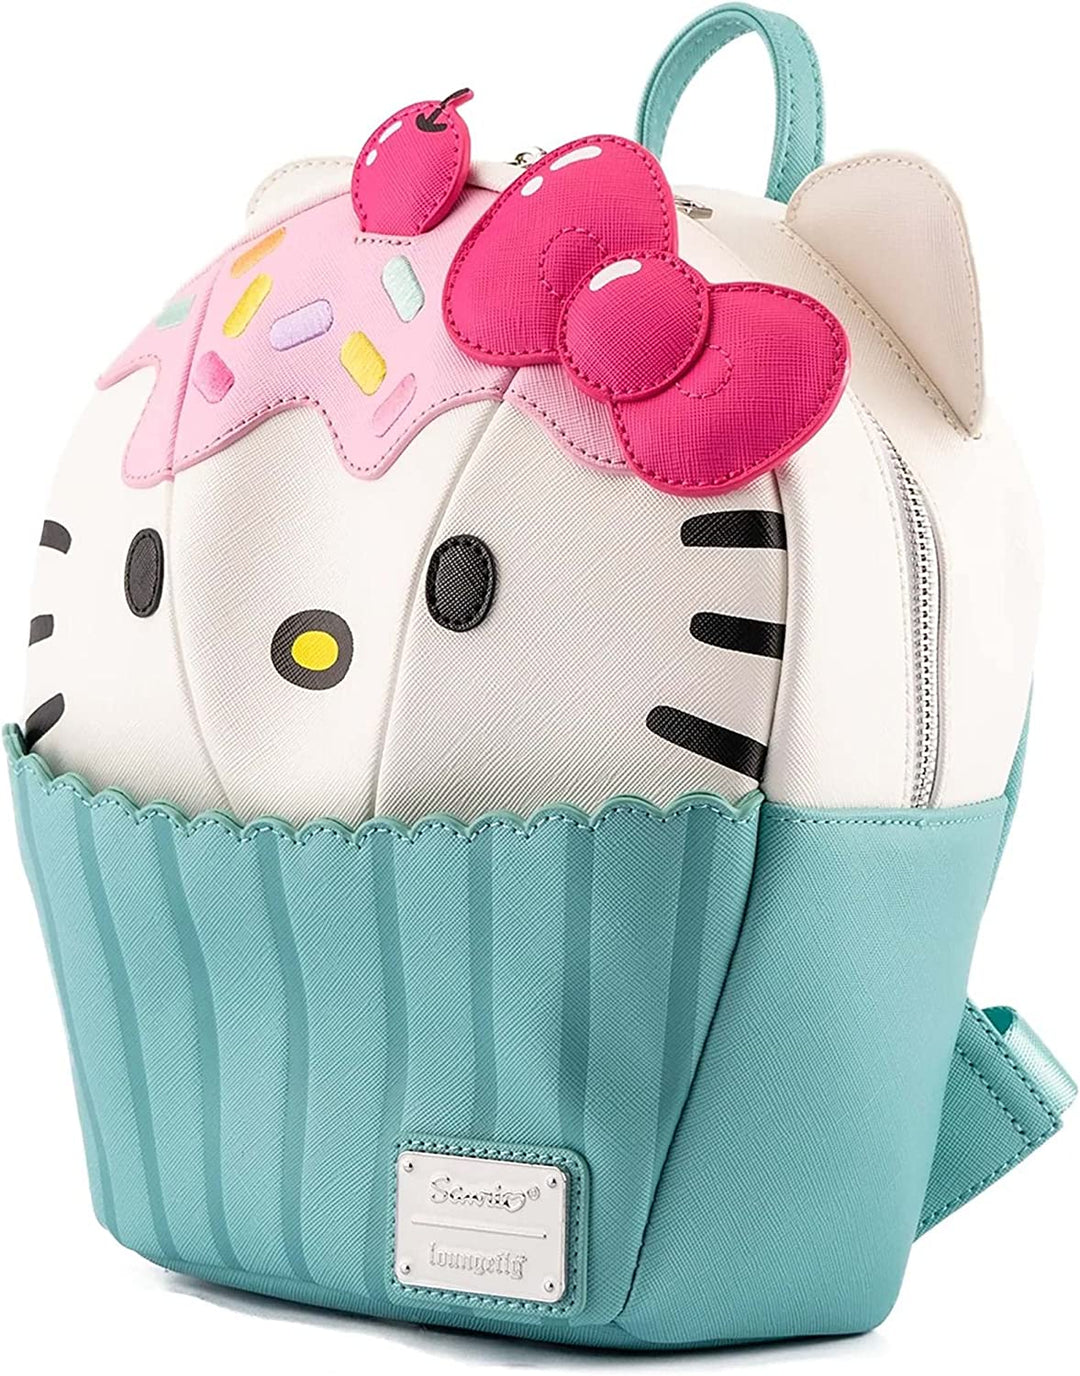 Loungefly Sanrio Hello Kitty Cupcake Adult Womens Double Strap Shoulder Bag Purse